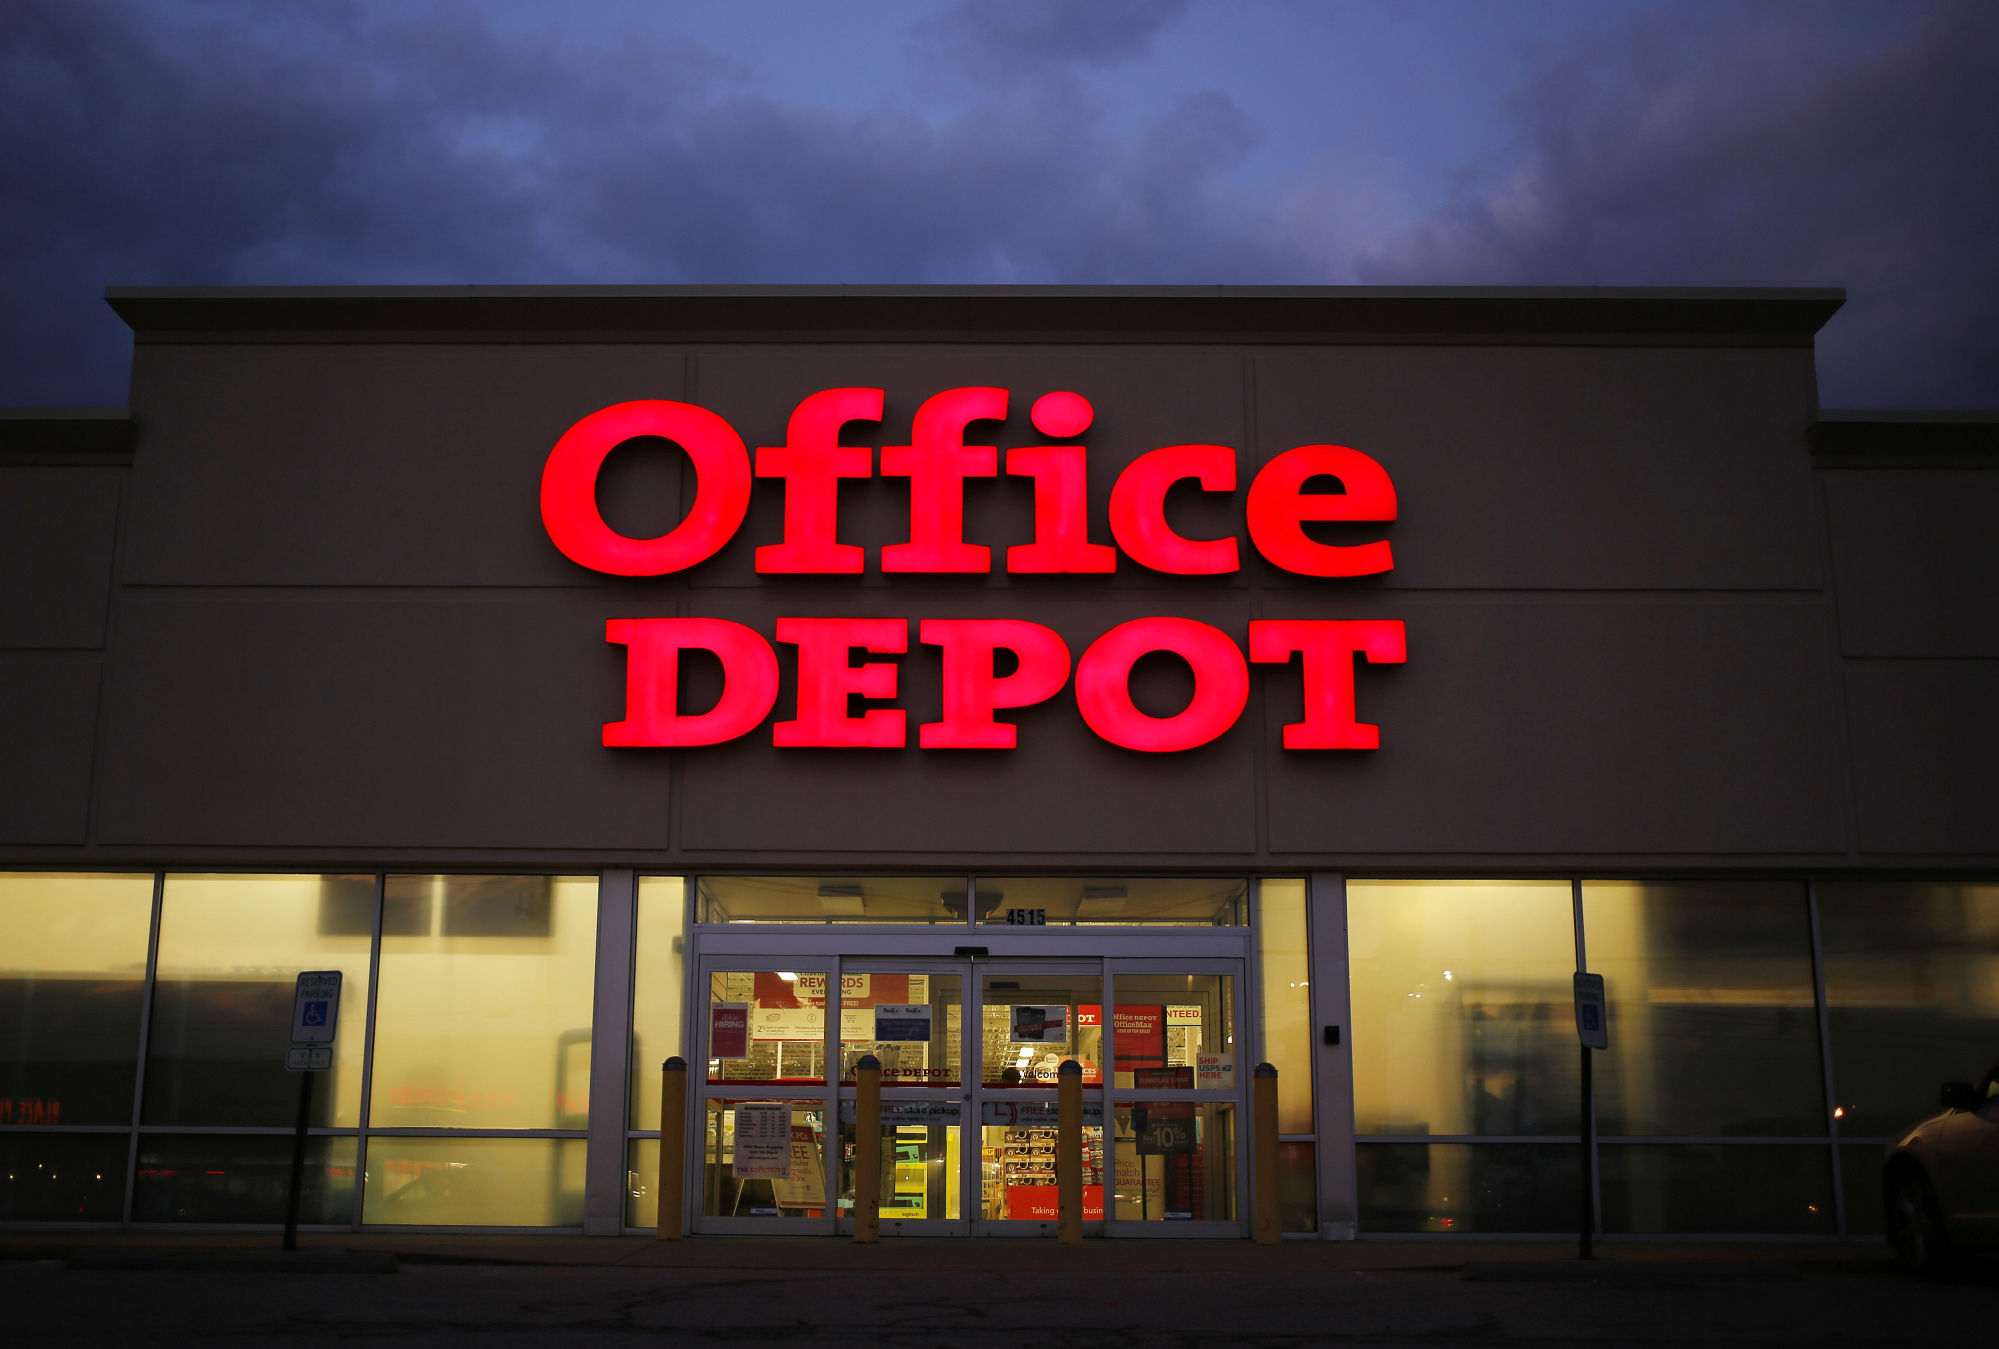  Pairs With Office Depot in First Major . Tie-Up - Bloomberg